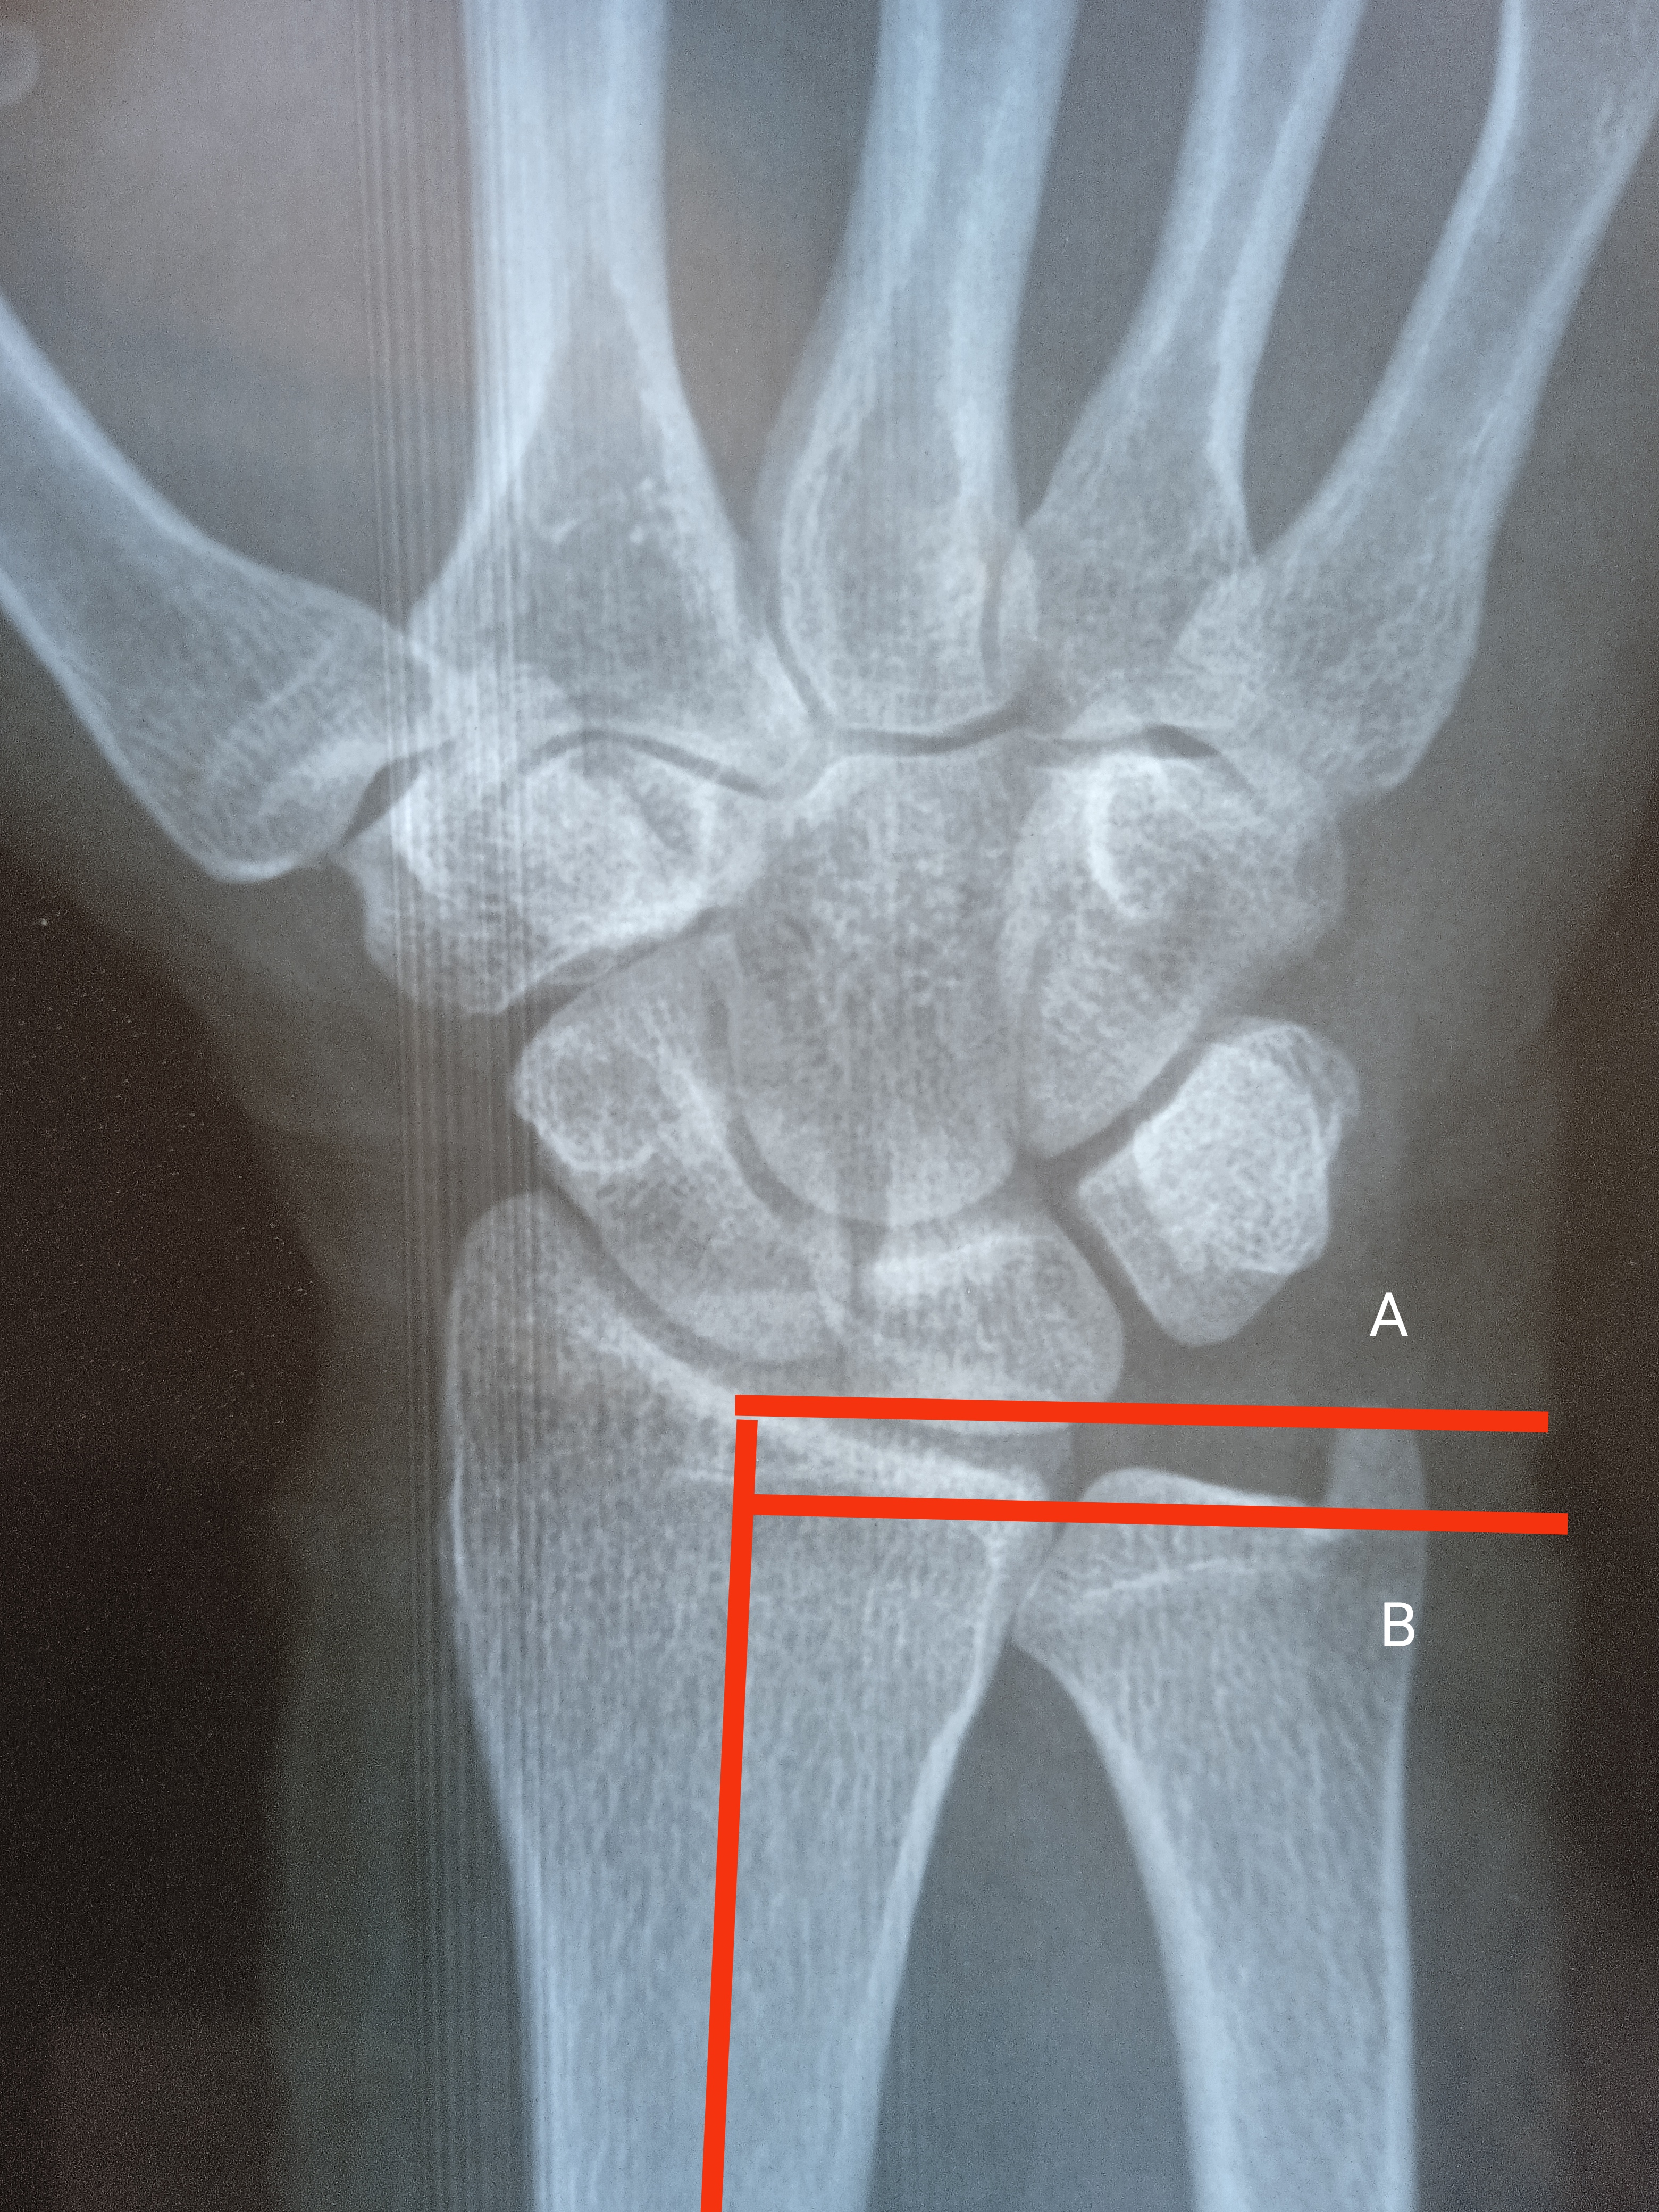 Ulnar Variance: Both lines are perpendicular to the long axis of radius